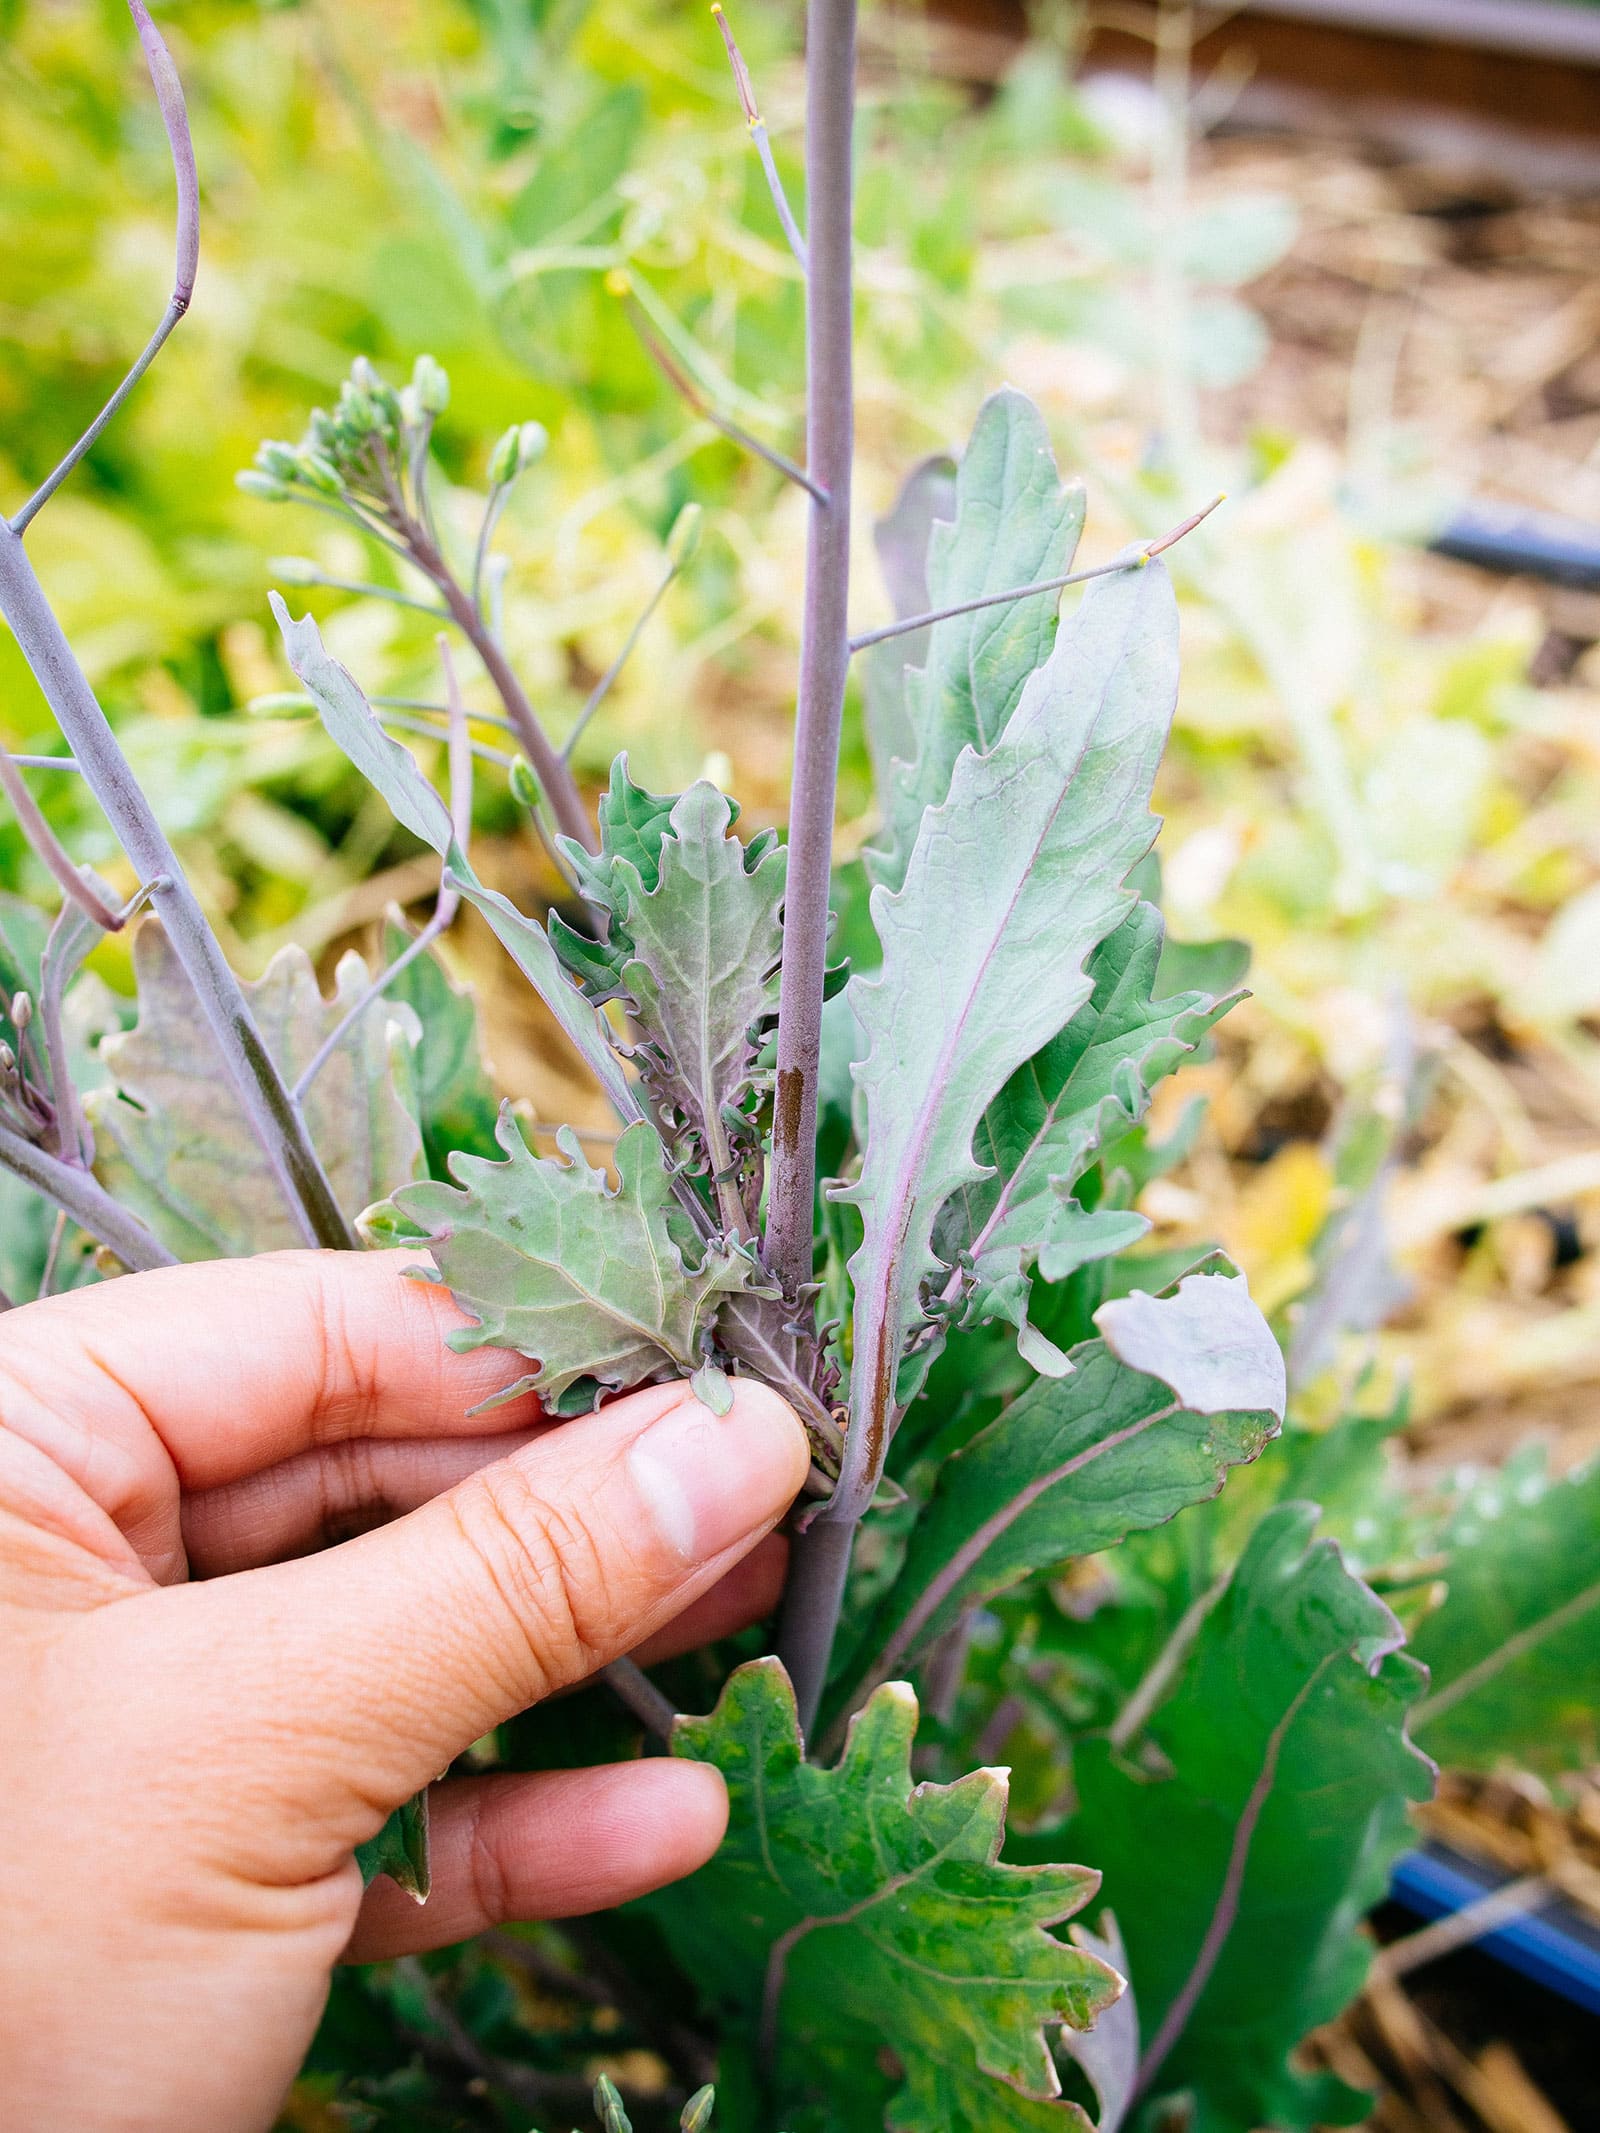 Hand holding bolted kale plant with a thick, woody flower stem